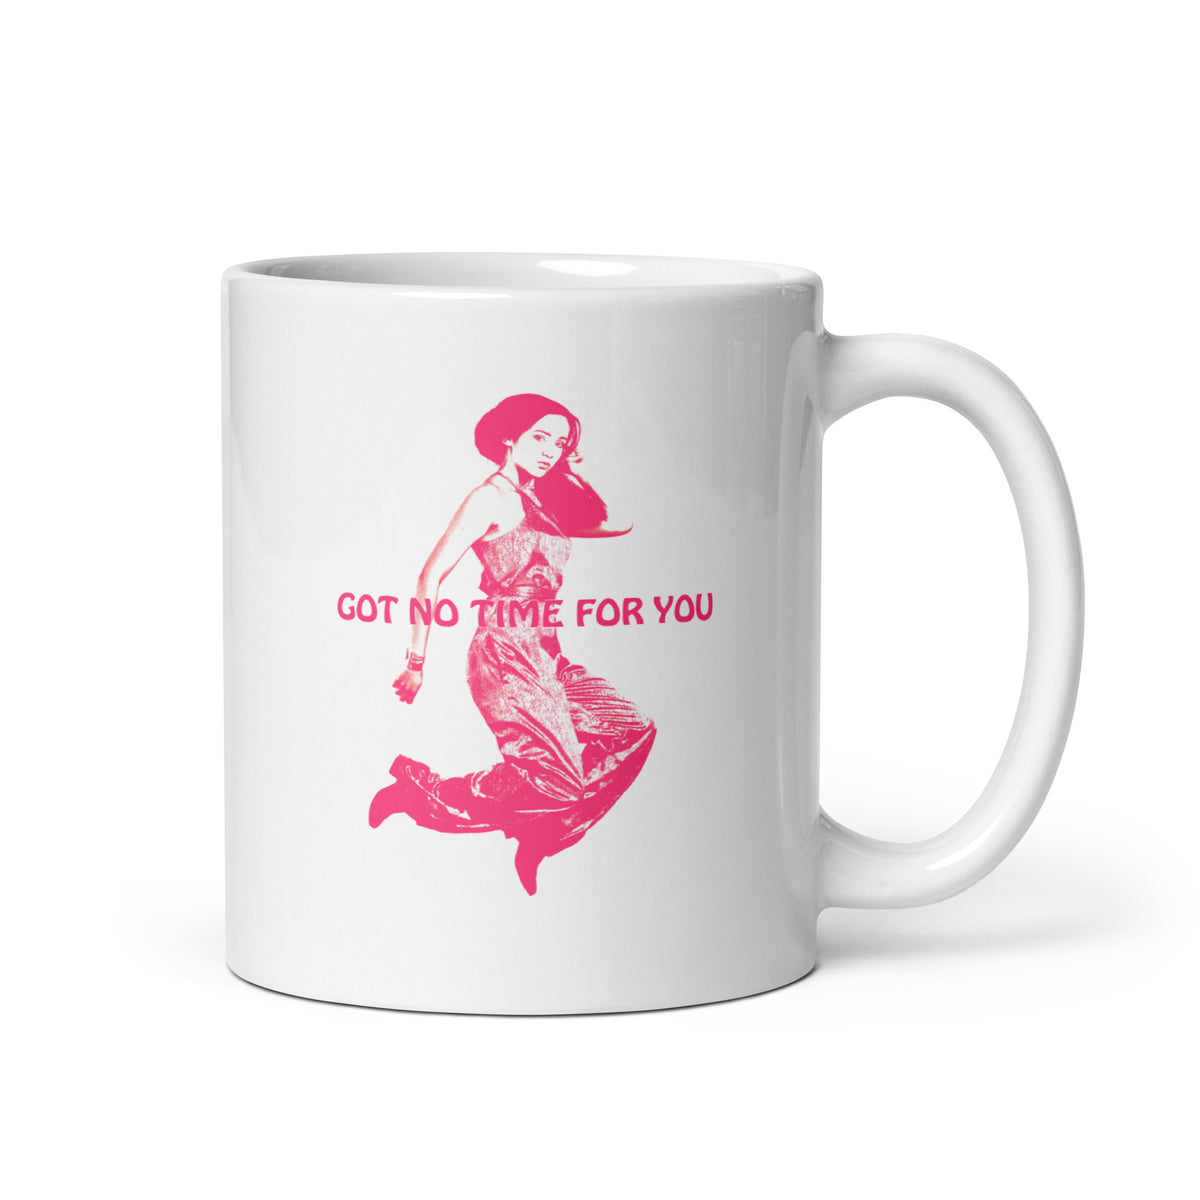 Coffee mug with a young woman jumping in the air with the words Got NO Time For You- both the woman and words are pink